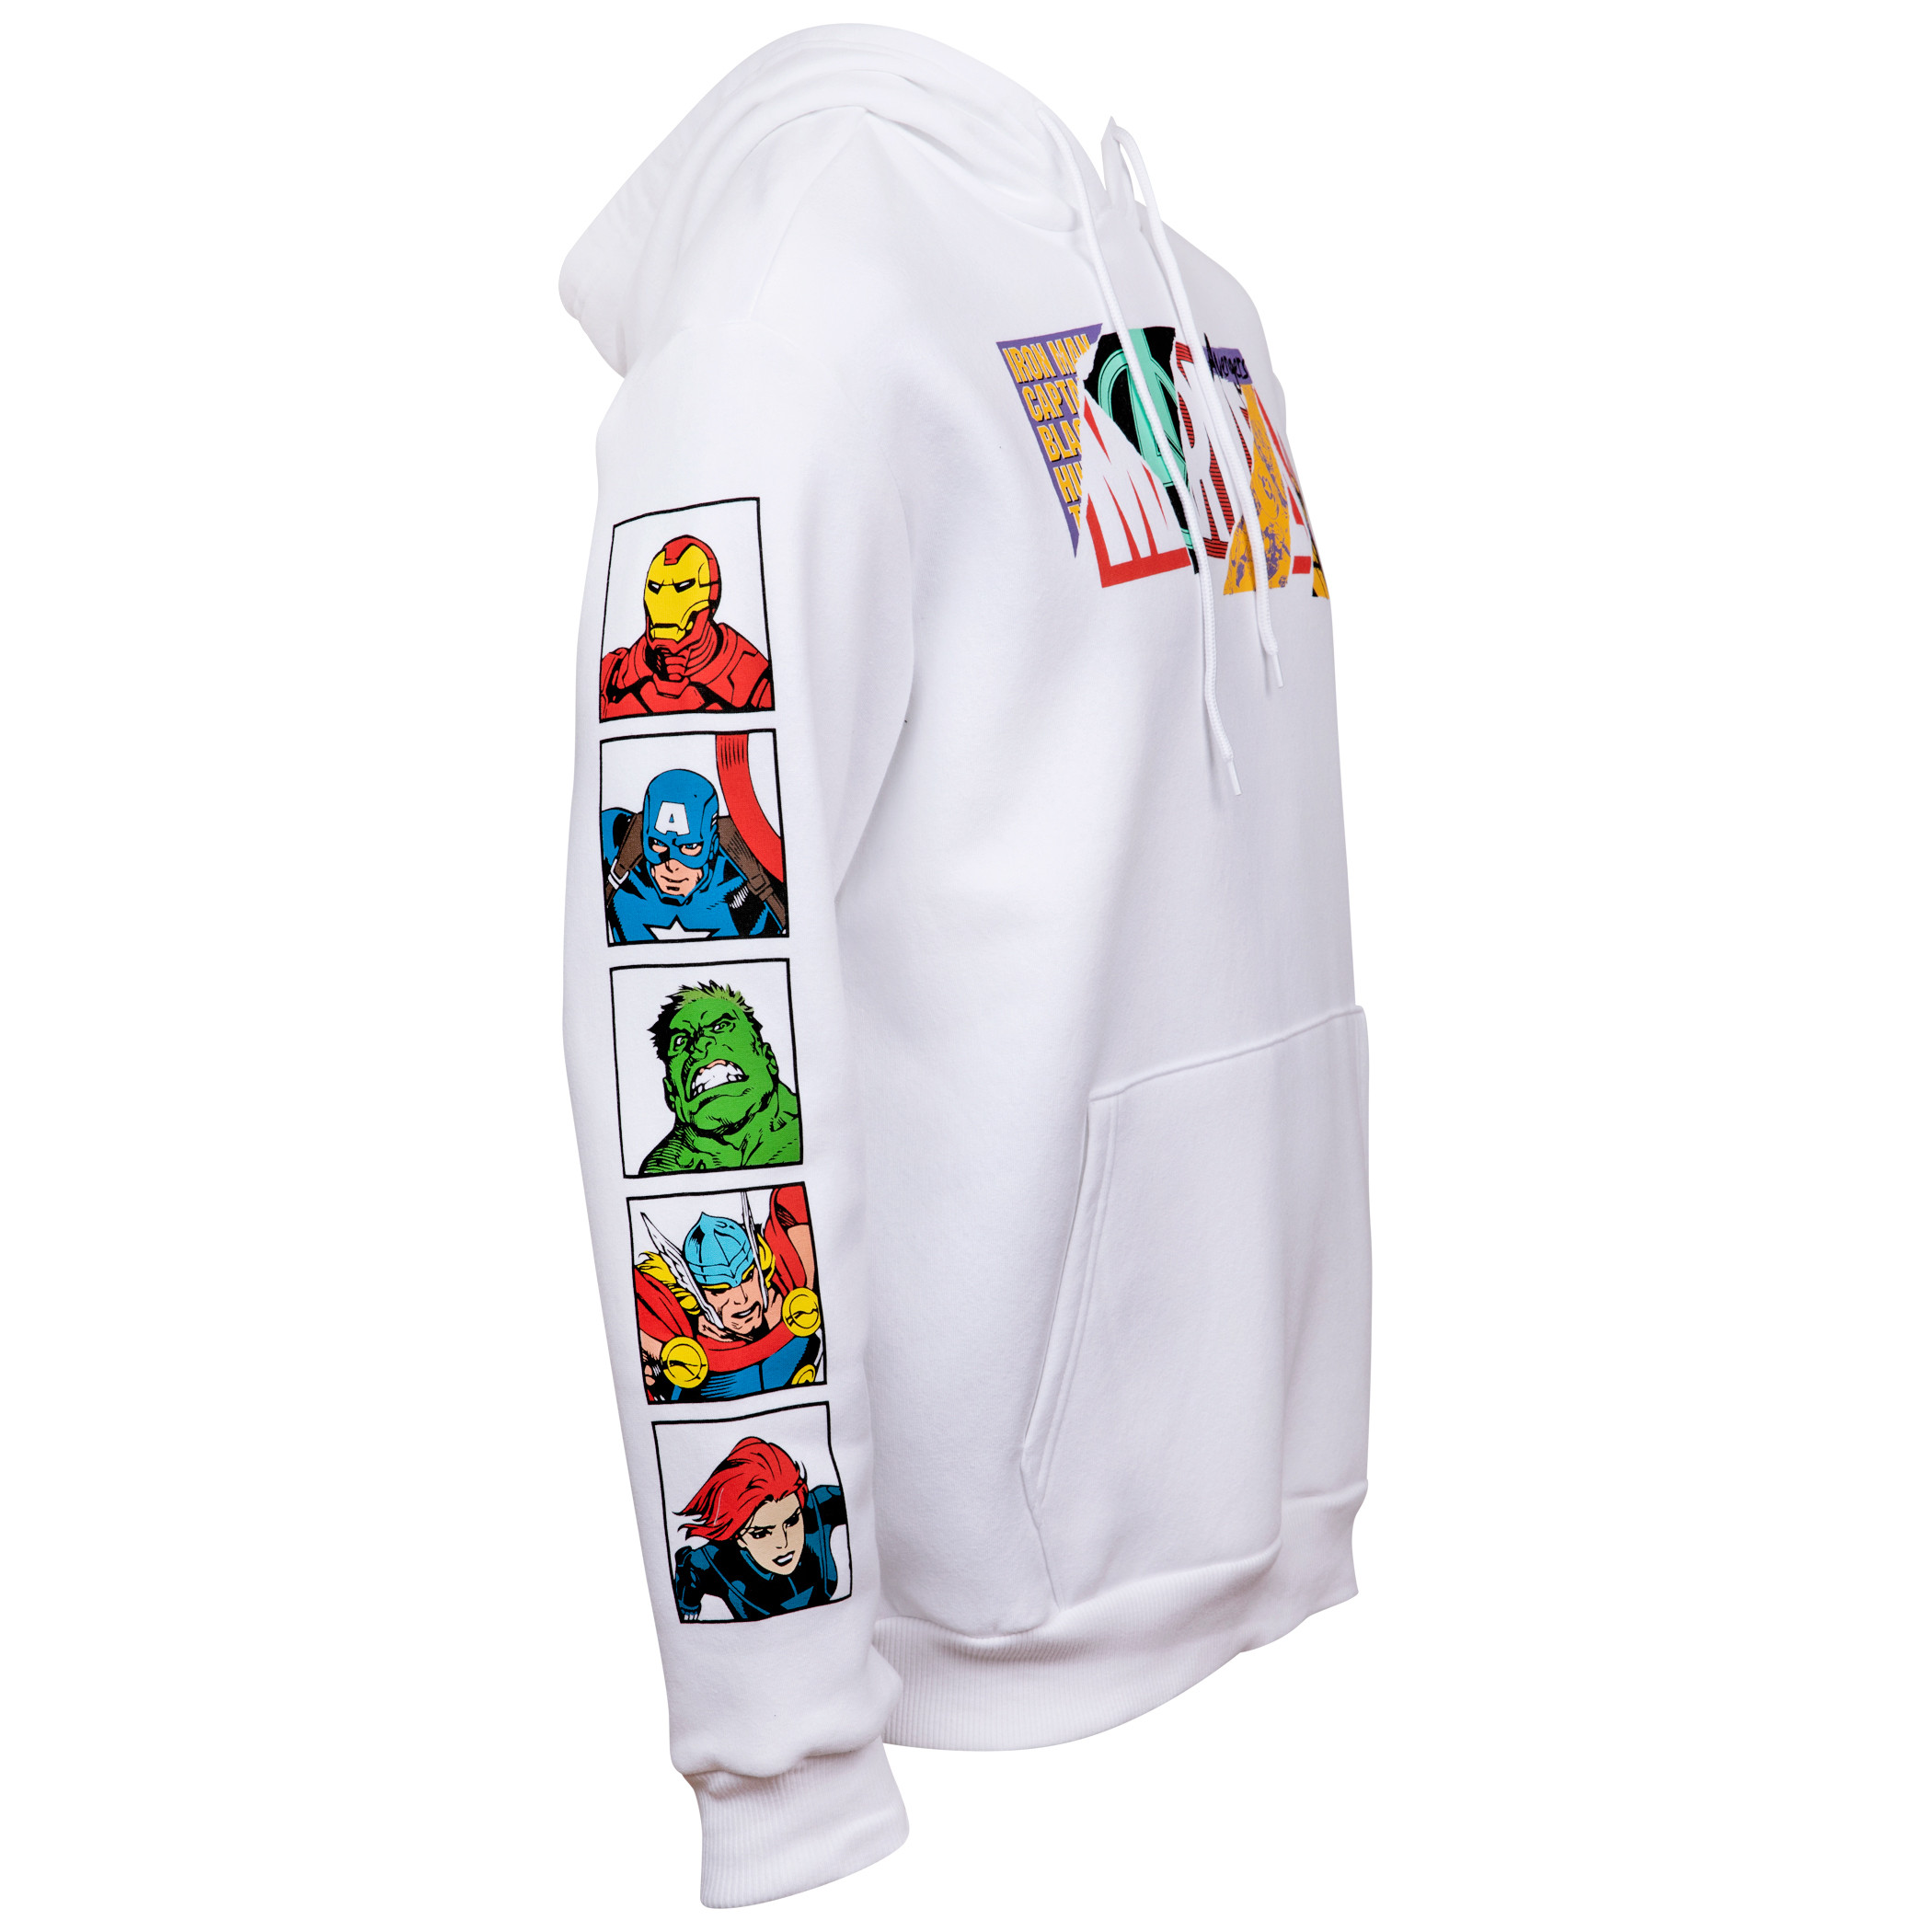 Marvel Brand Collage Text Hoodie With Character Block Sleeve Prints